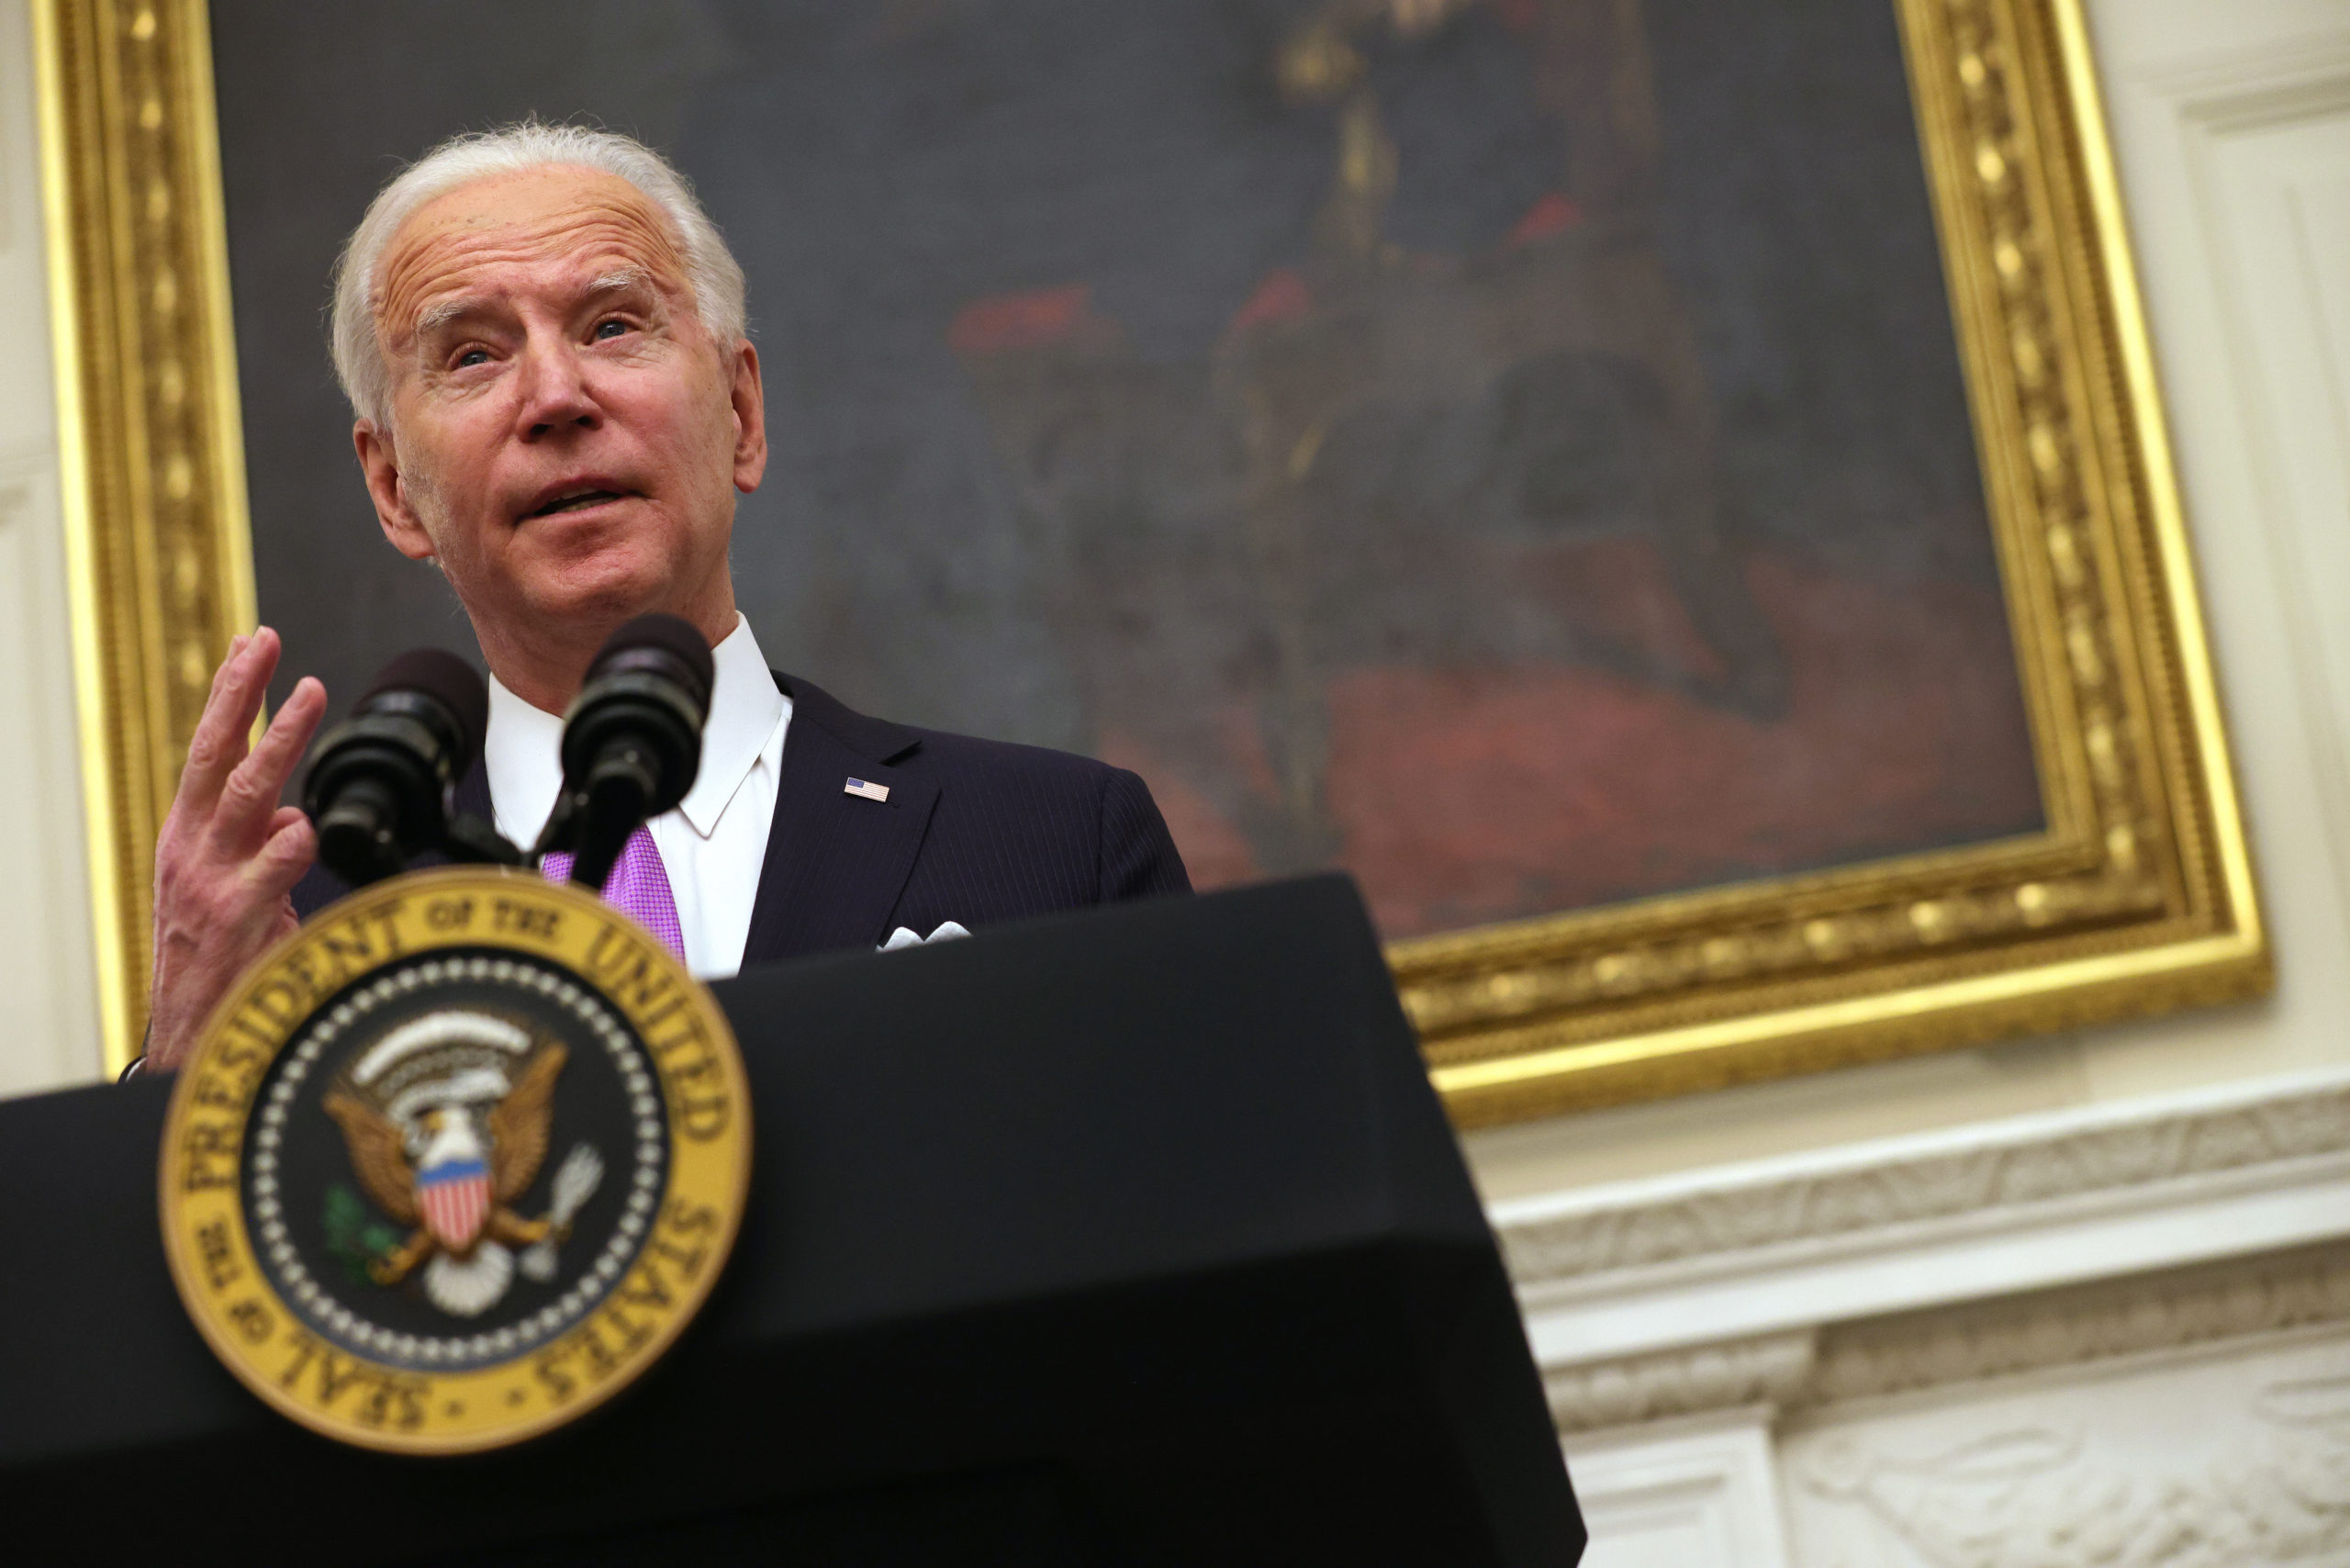 WASHINGTON, DC - JANUARY 21: U.S. President Joe Biden speaks during an event in the State Dining Room of the White House January 21, 2021 in Washington, DC. President Biden delivered remarks on his administration’s COVID-19 response, and signed executive orders and other presidential actions. (Photo by Alex Wong/Getty Images)